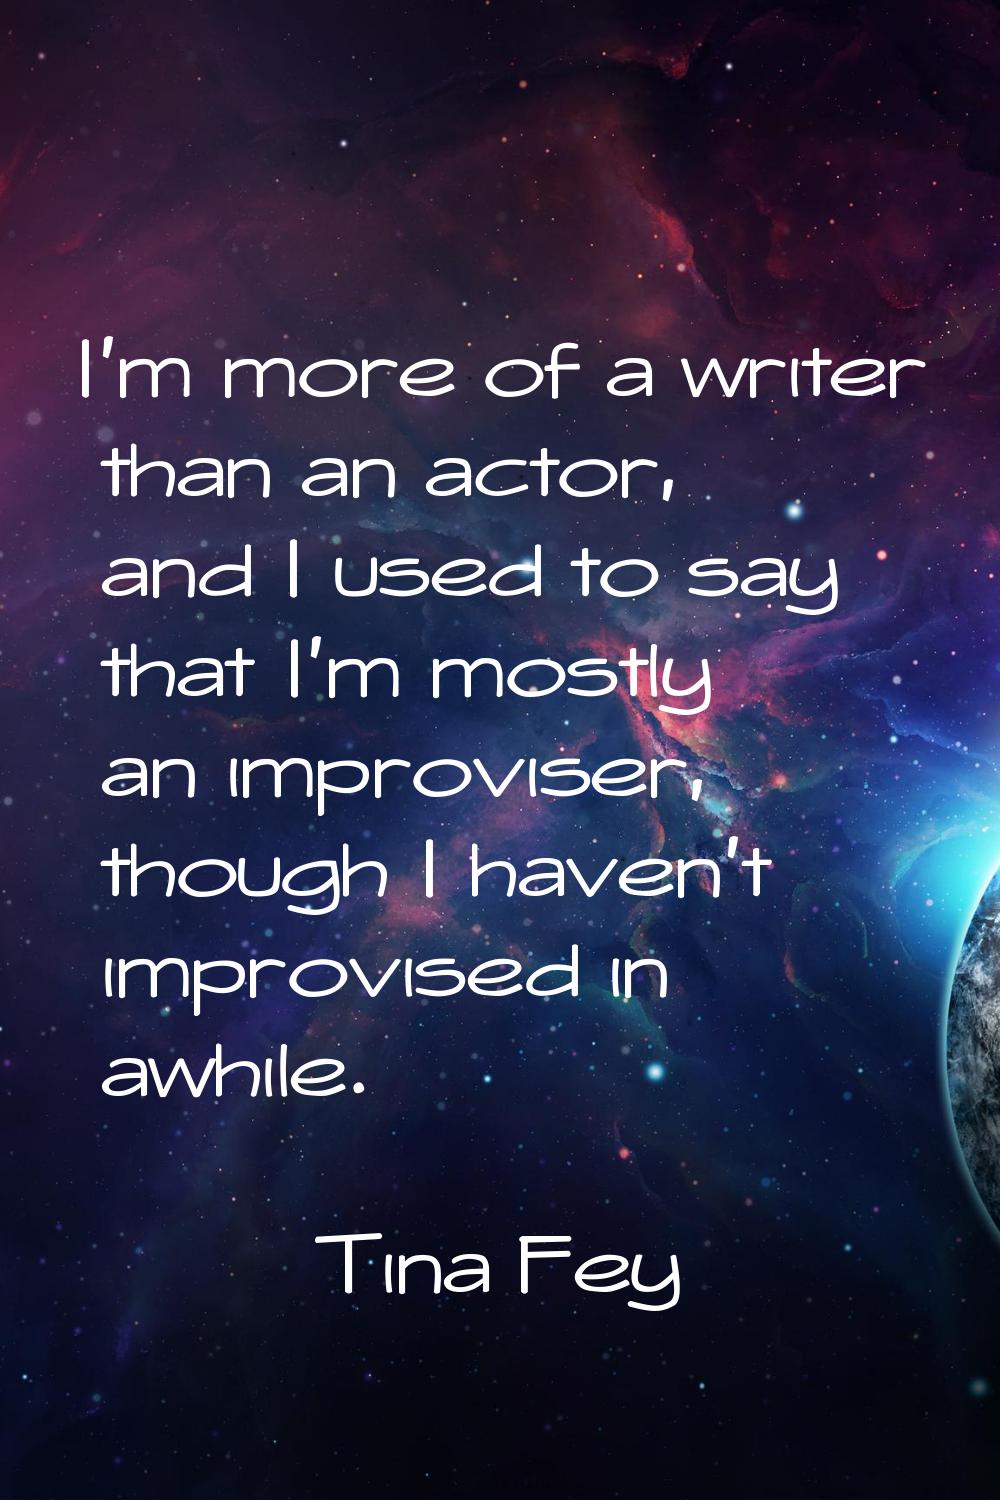 I'm more of a writer than an actor, and I used to say that I'm mostly an improviser, though I haven